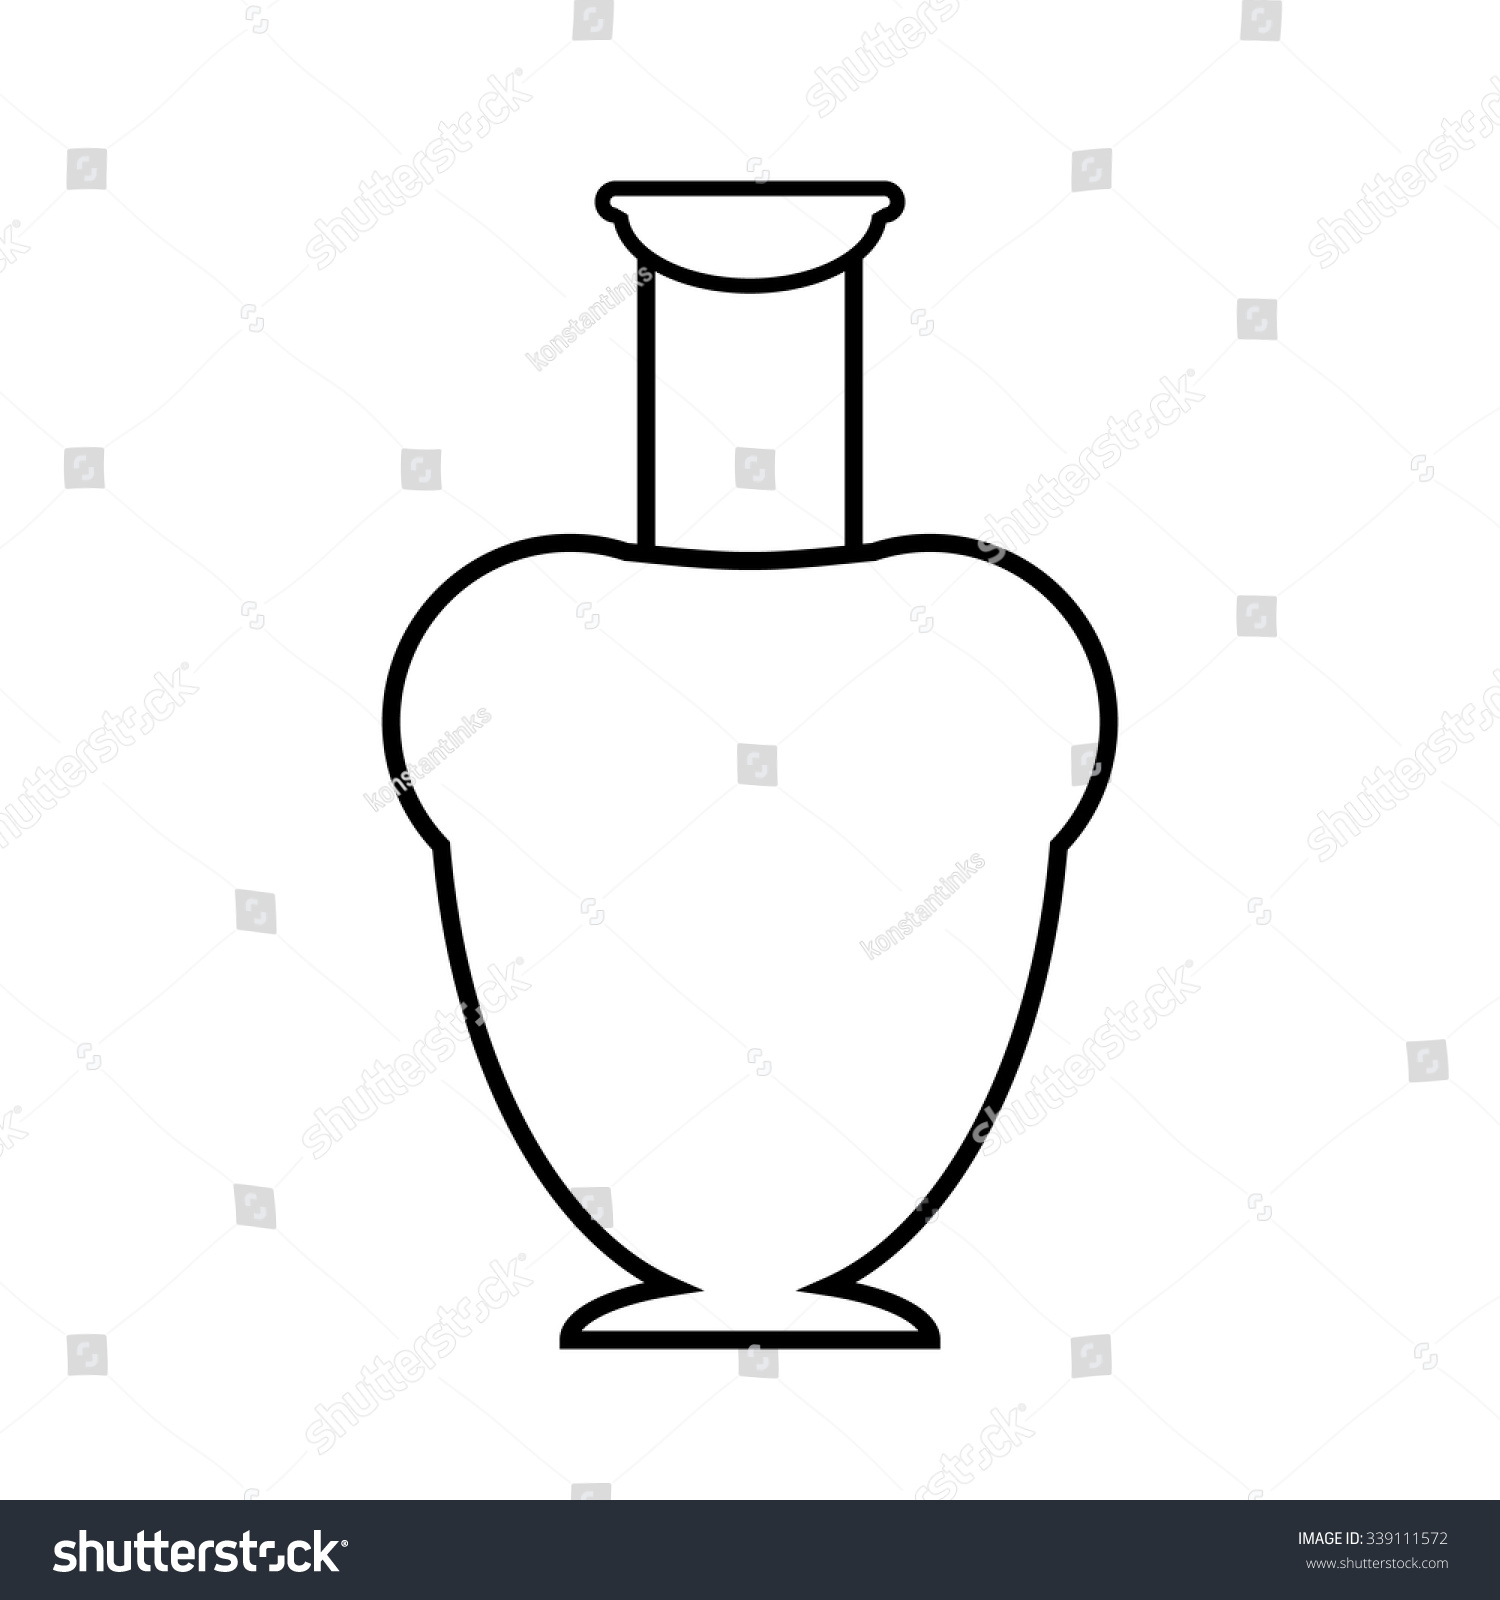 Ancient Vase On White Background Vector Stock Vector Royalty Free 339111572 Shutterstock 